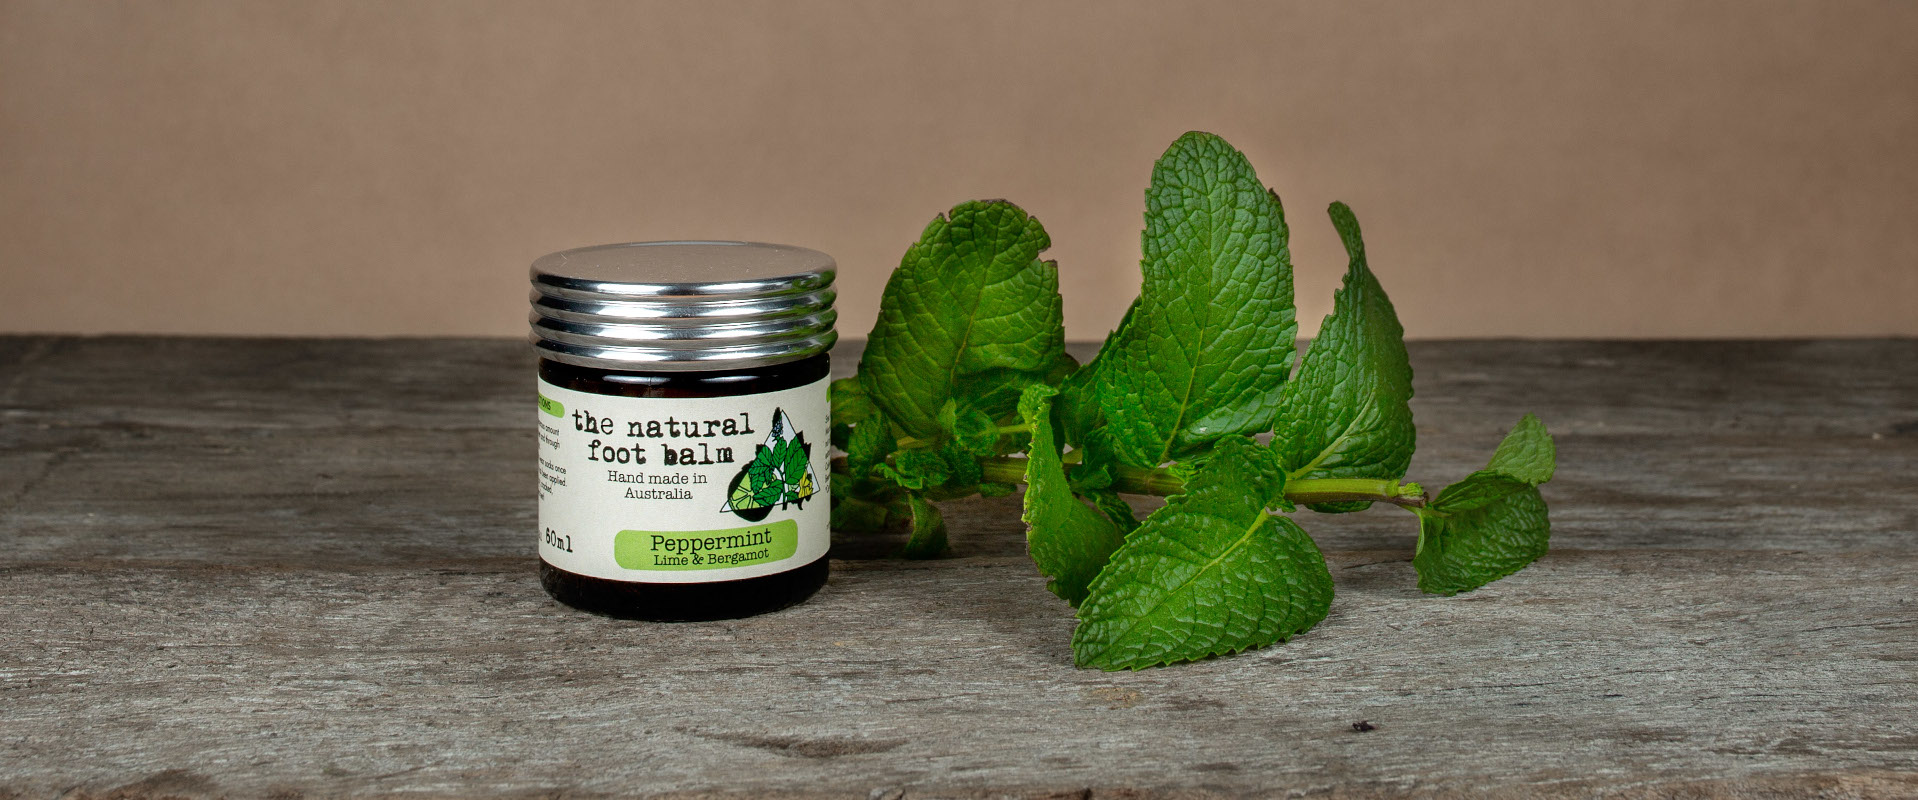 The Natural Deodorant Foot Balm (Peppermint), The Natural Deodorant